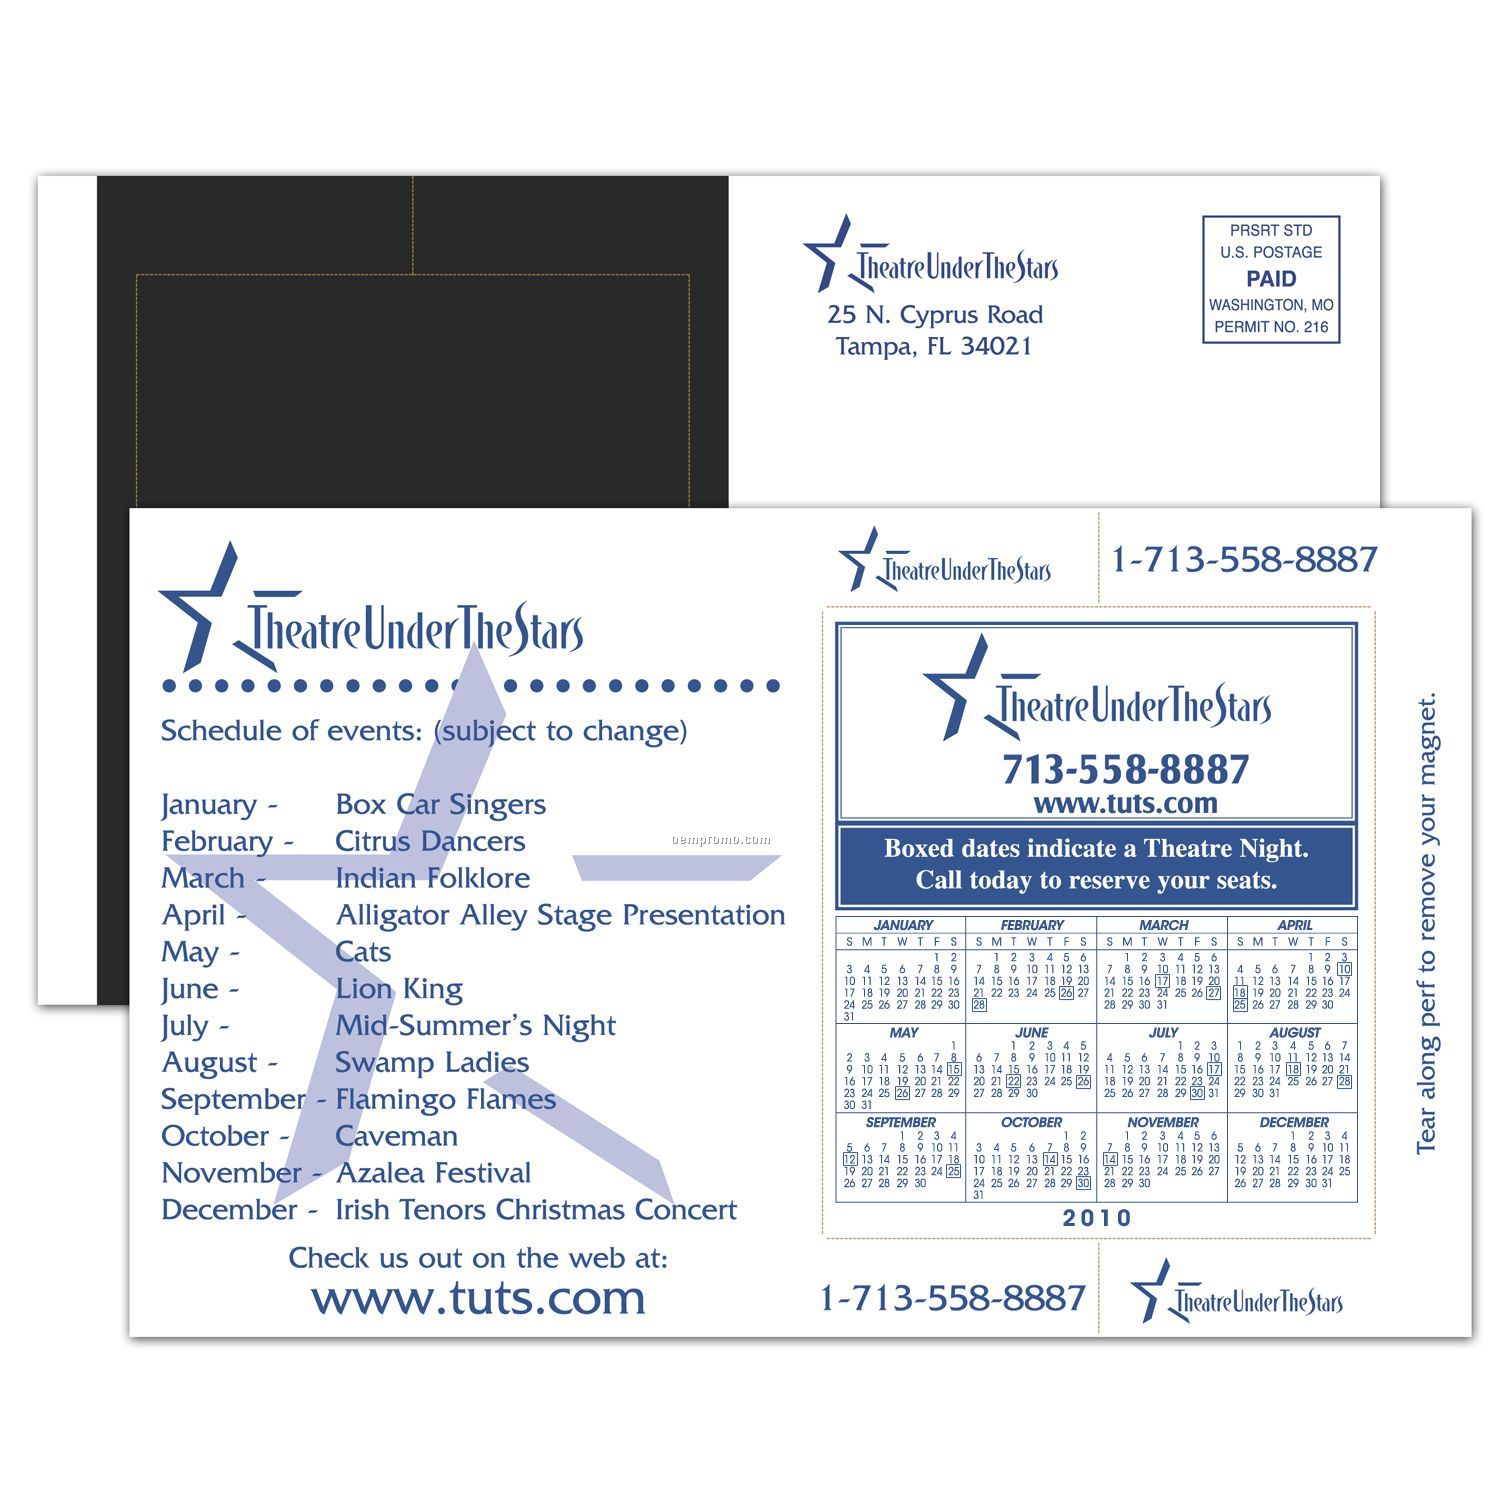 Magnetic Perforated Postcard W/ Magnet (5 1/4"X8 1/2") - 4 Color Process